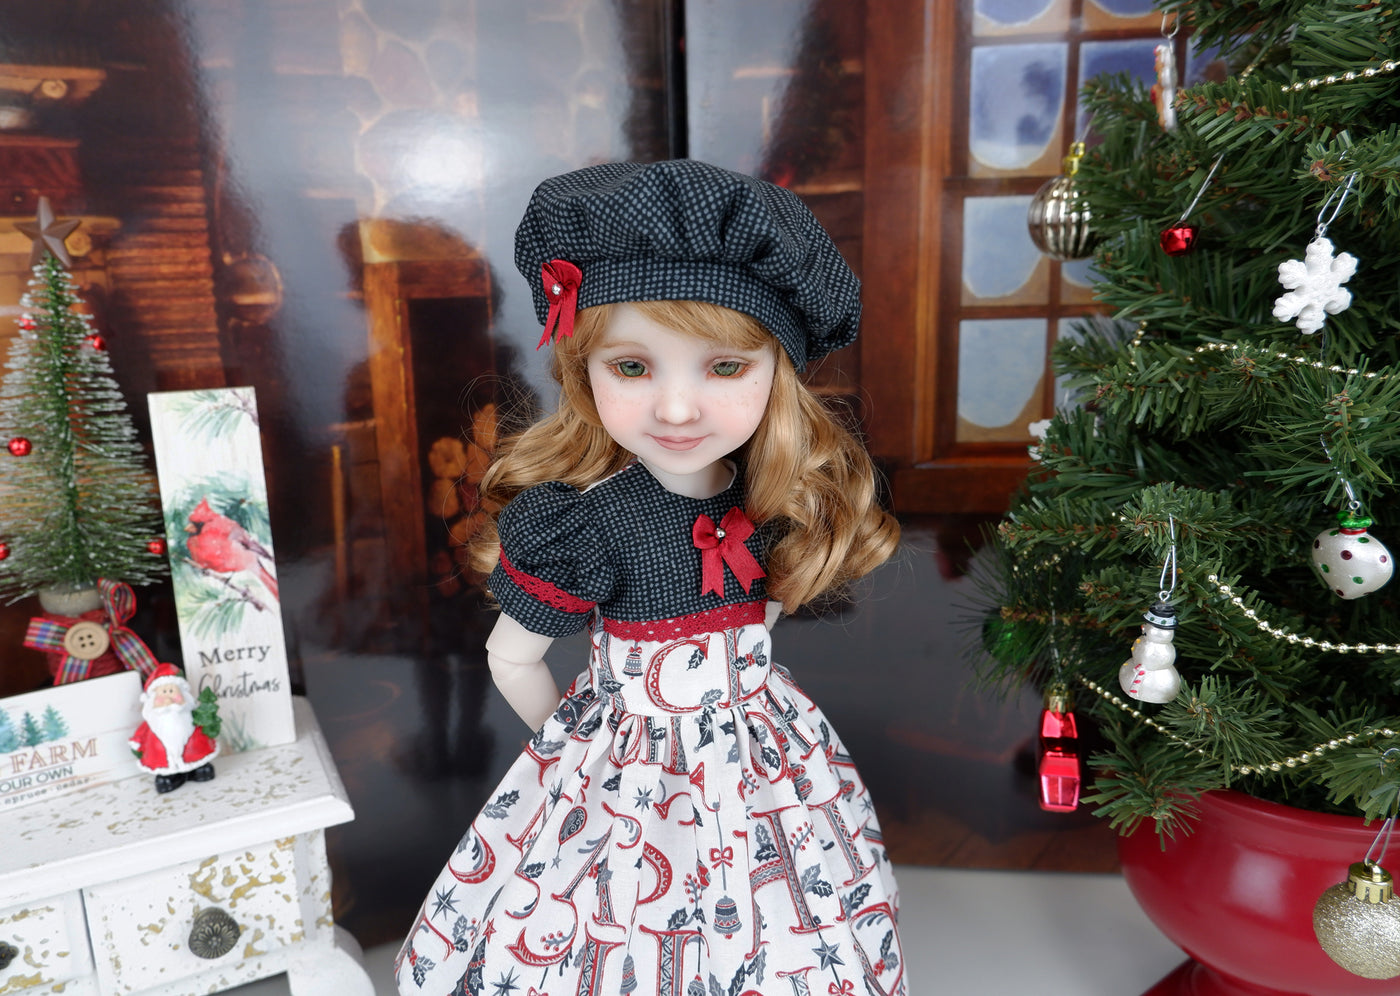 Joyful Holiday - dress and shoes for Ruby Red Fashion Friends doll